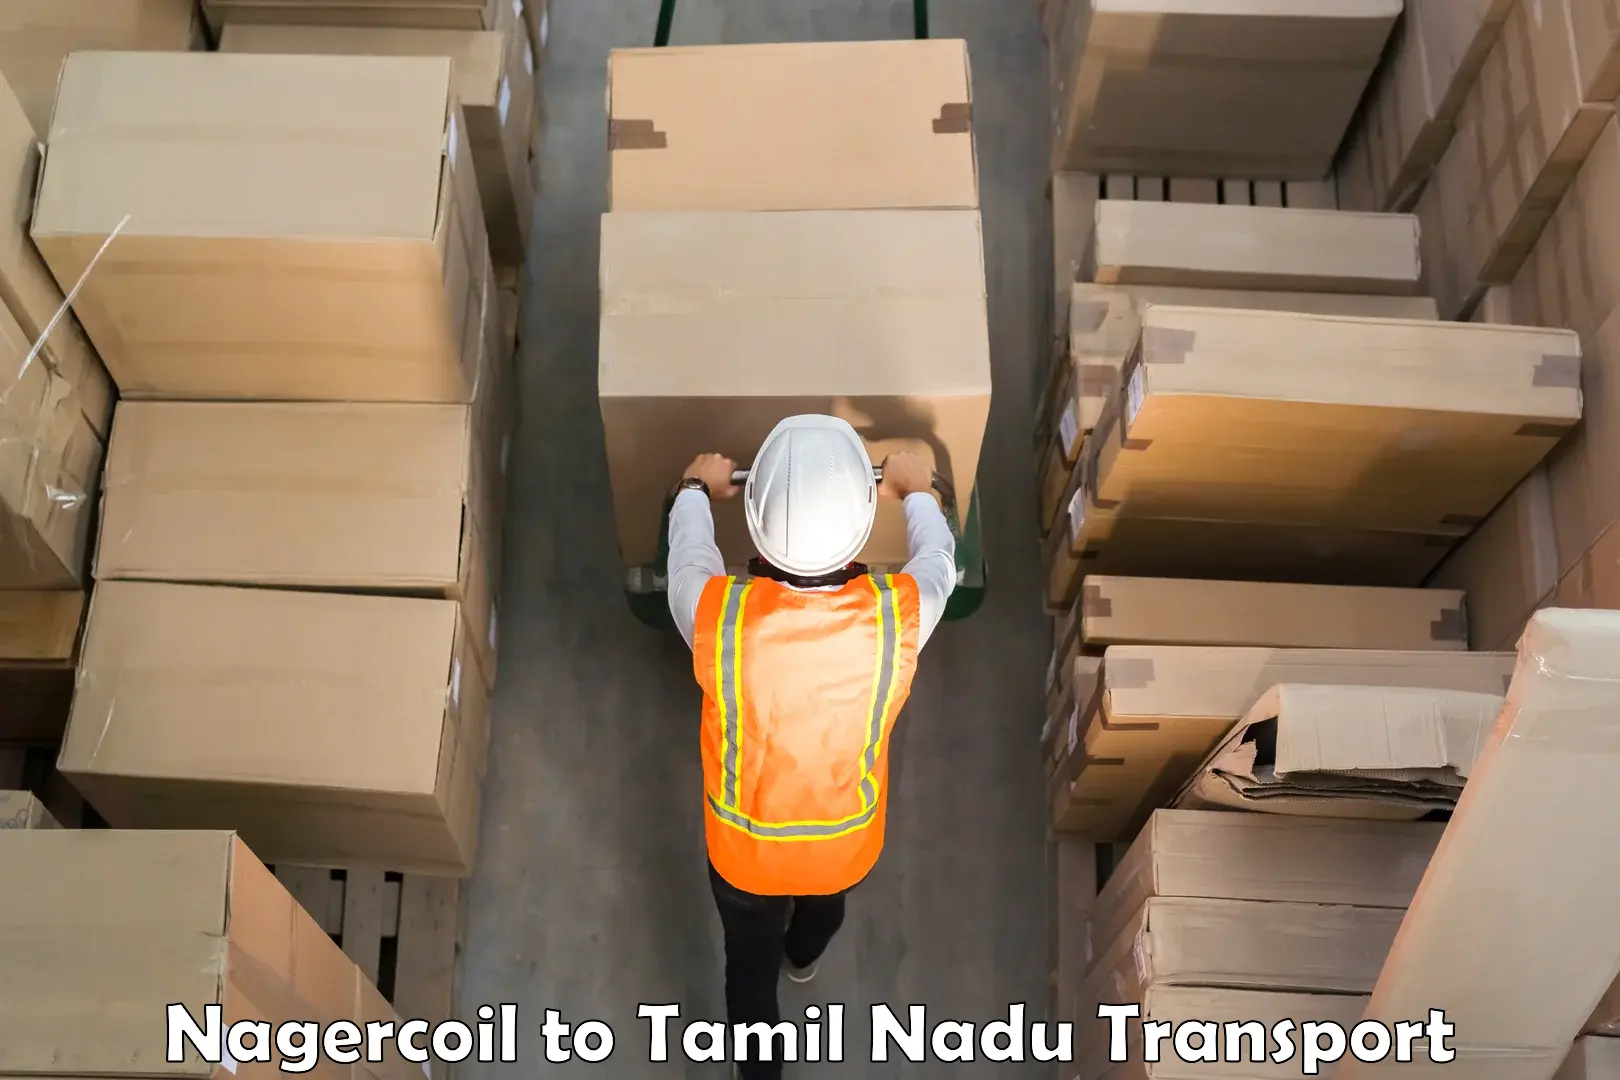 Land transport services Nagercoil to Shanmugha Arts Science Technology and Research Academy Thanjavur